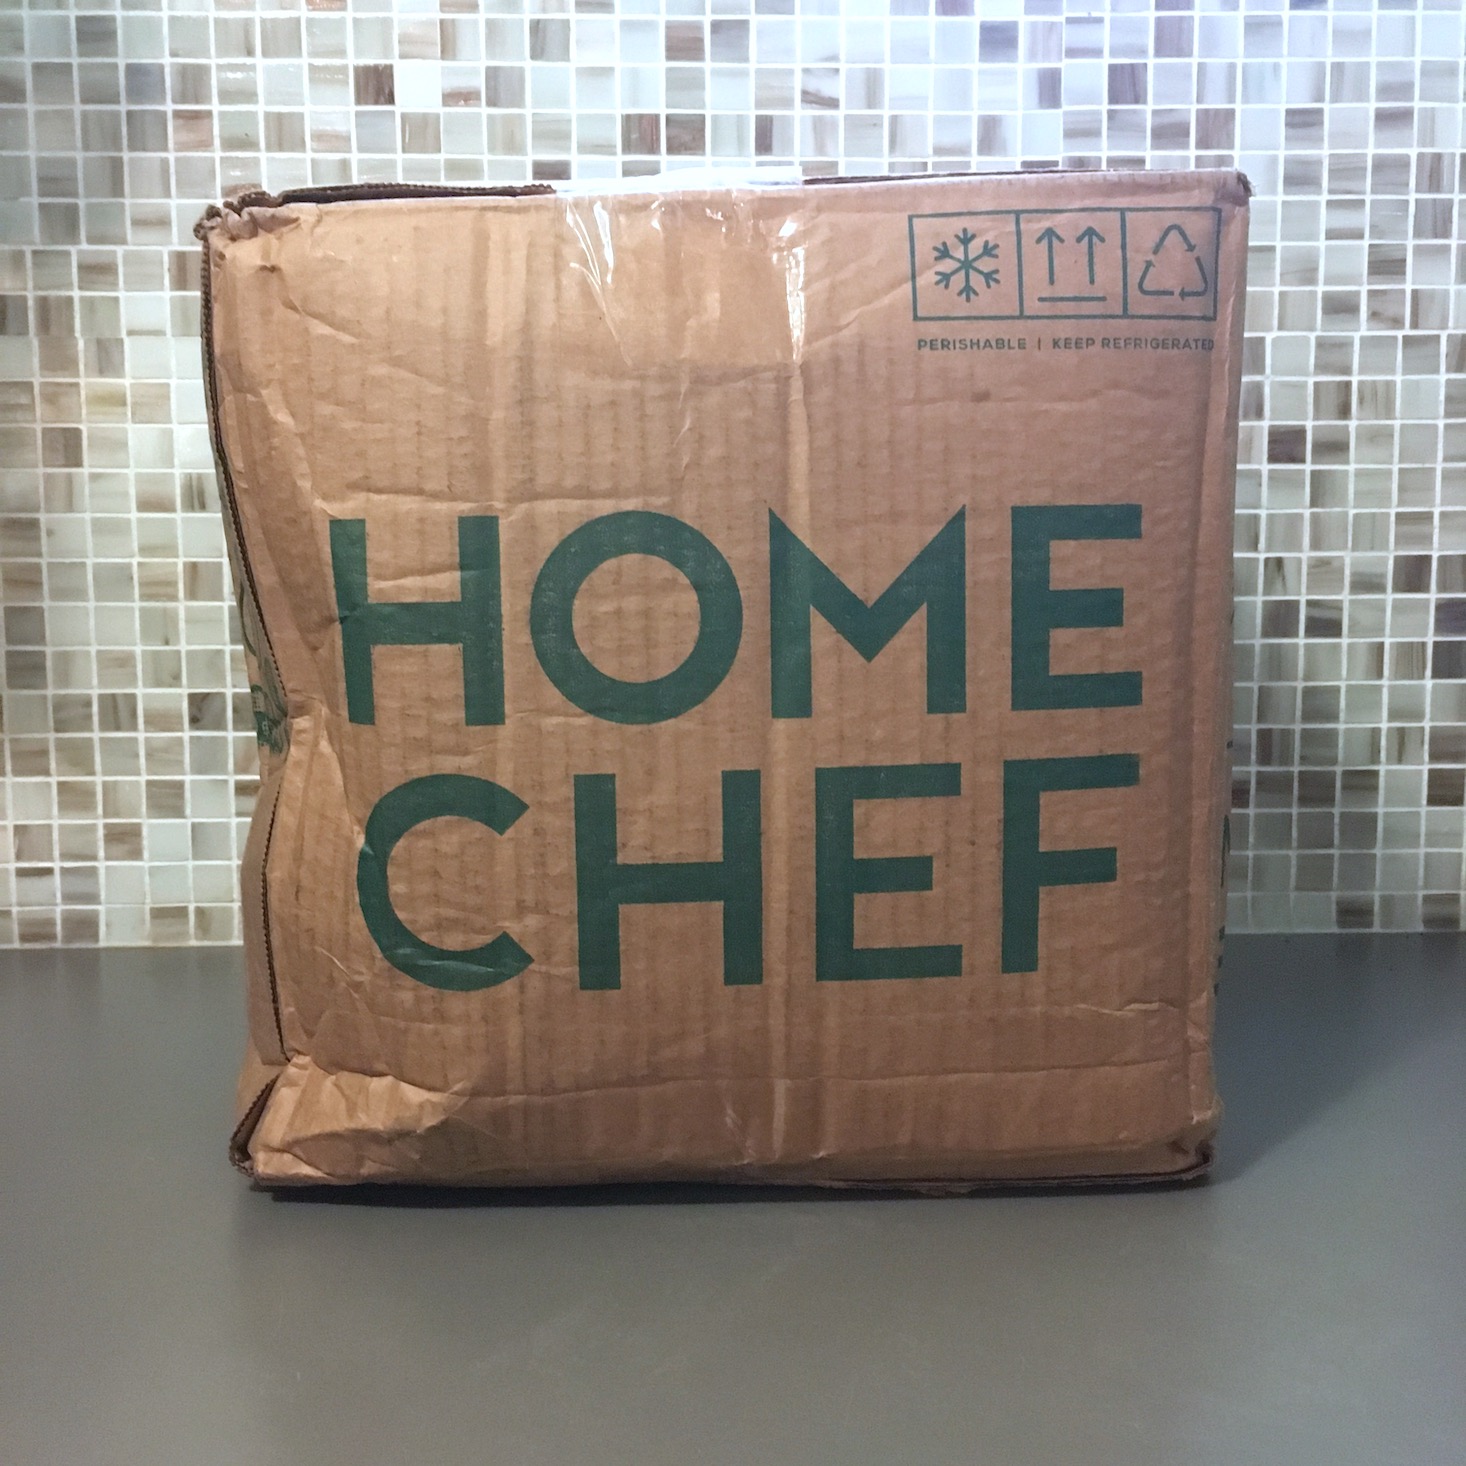 Home Chef Meal Kit Review + Coupon – August 2020